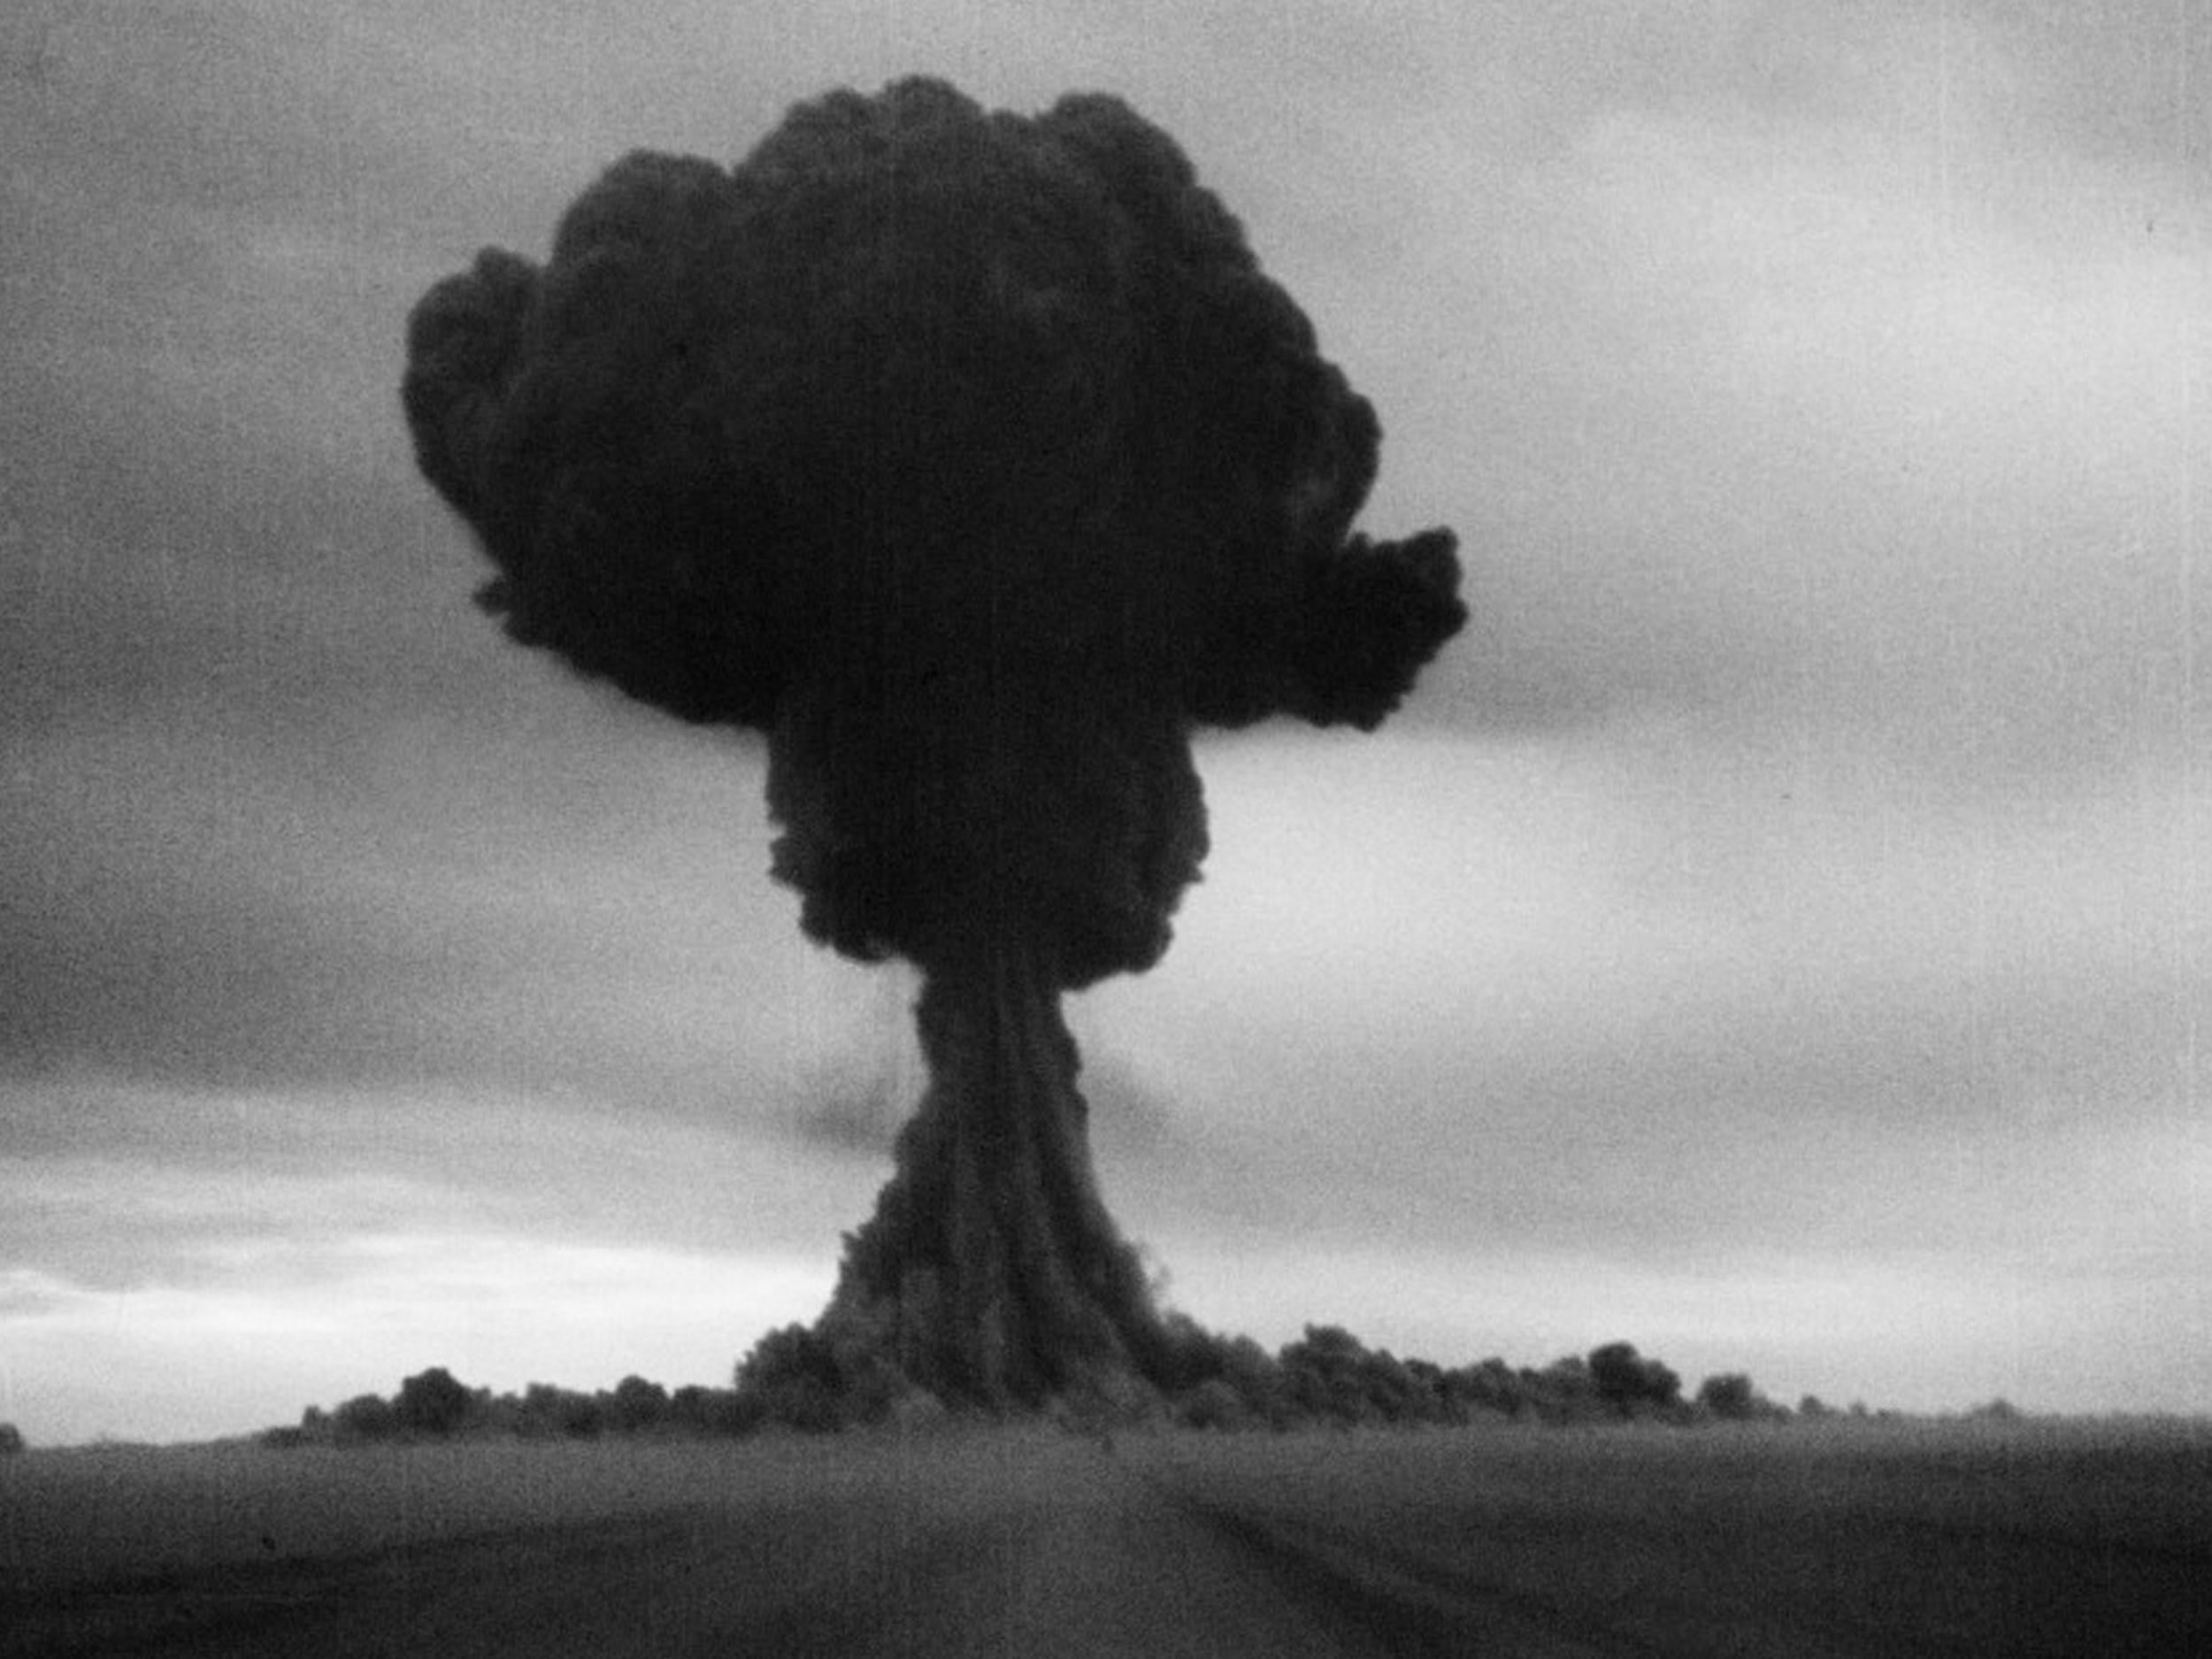 The first Soviet nuclear test, code named 'First Lightning', detonated a plutonium bomb, the RDS-1